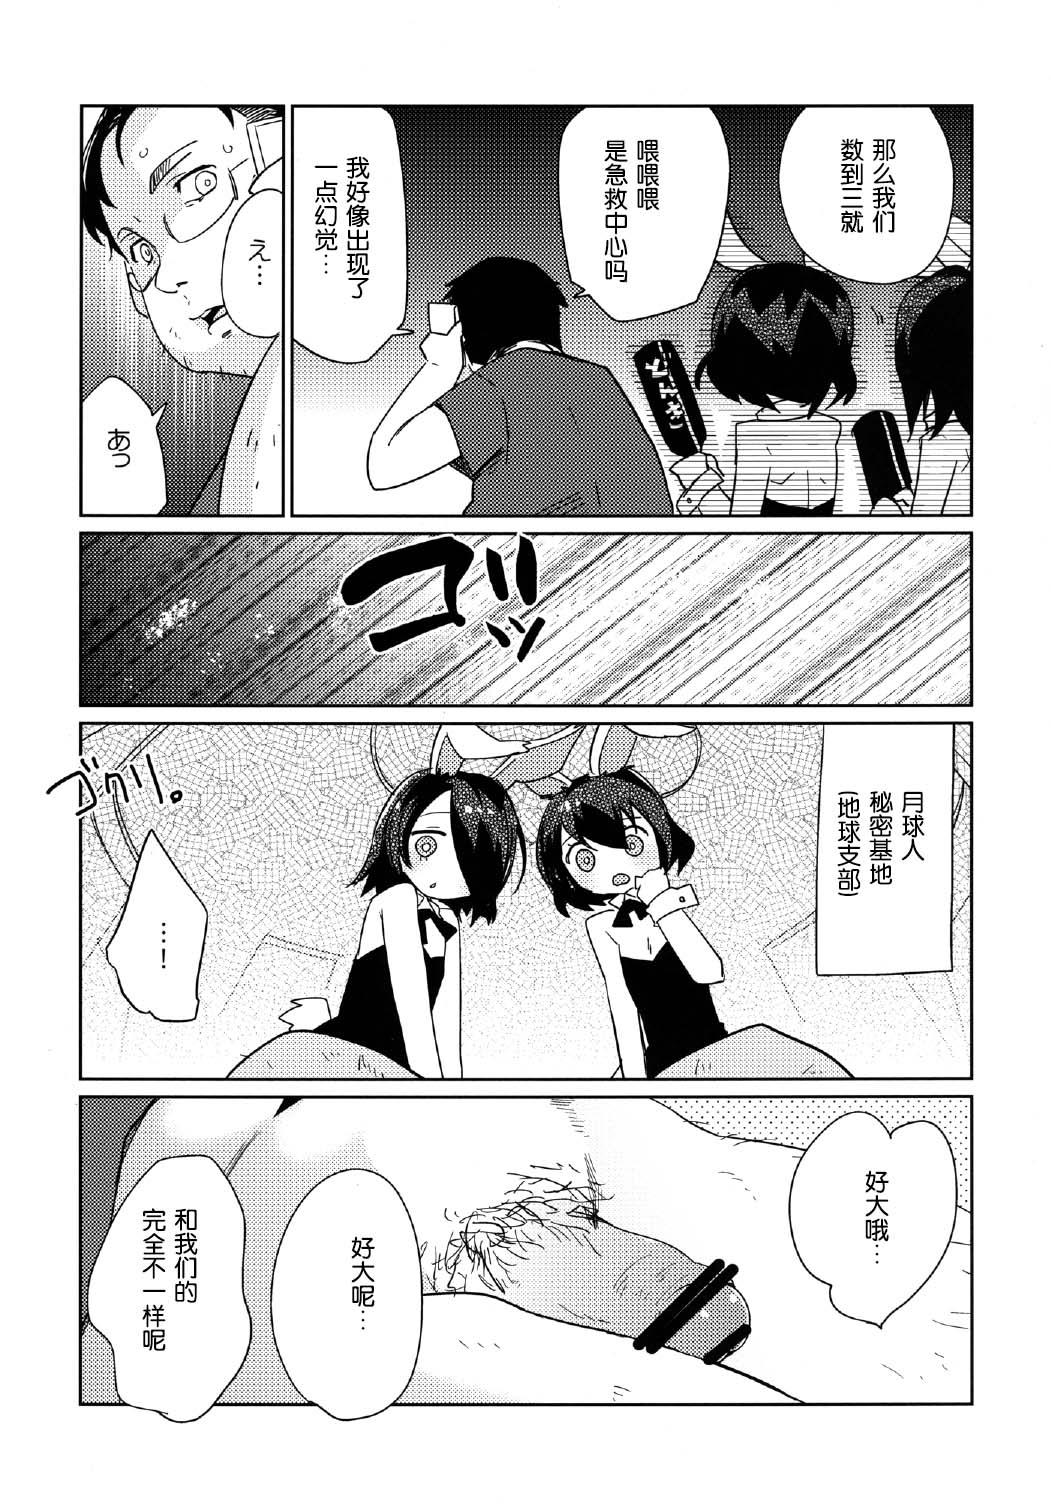 4some Moonlight Uousaou Blow Jobs - Page 7